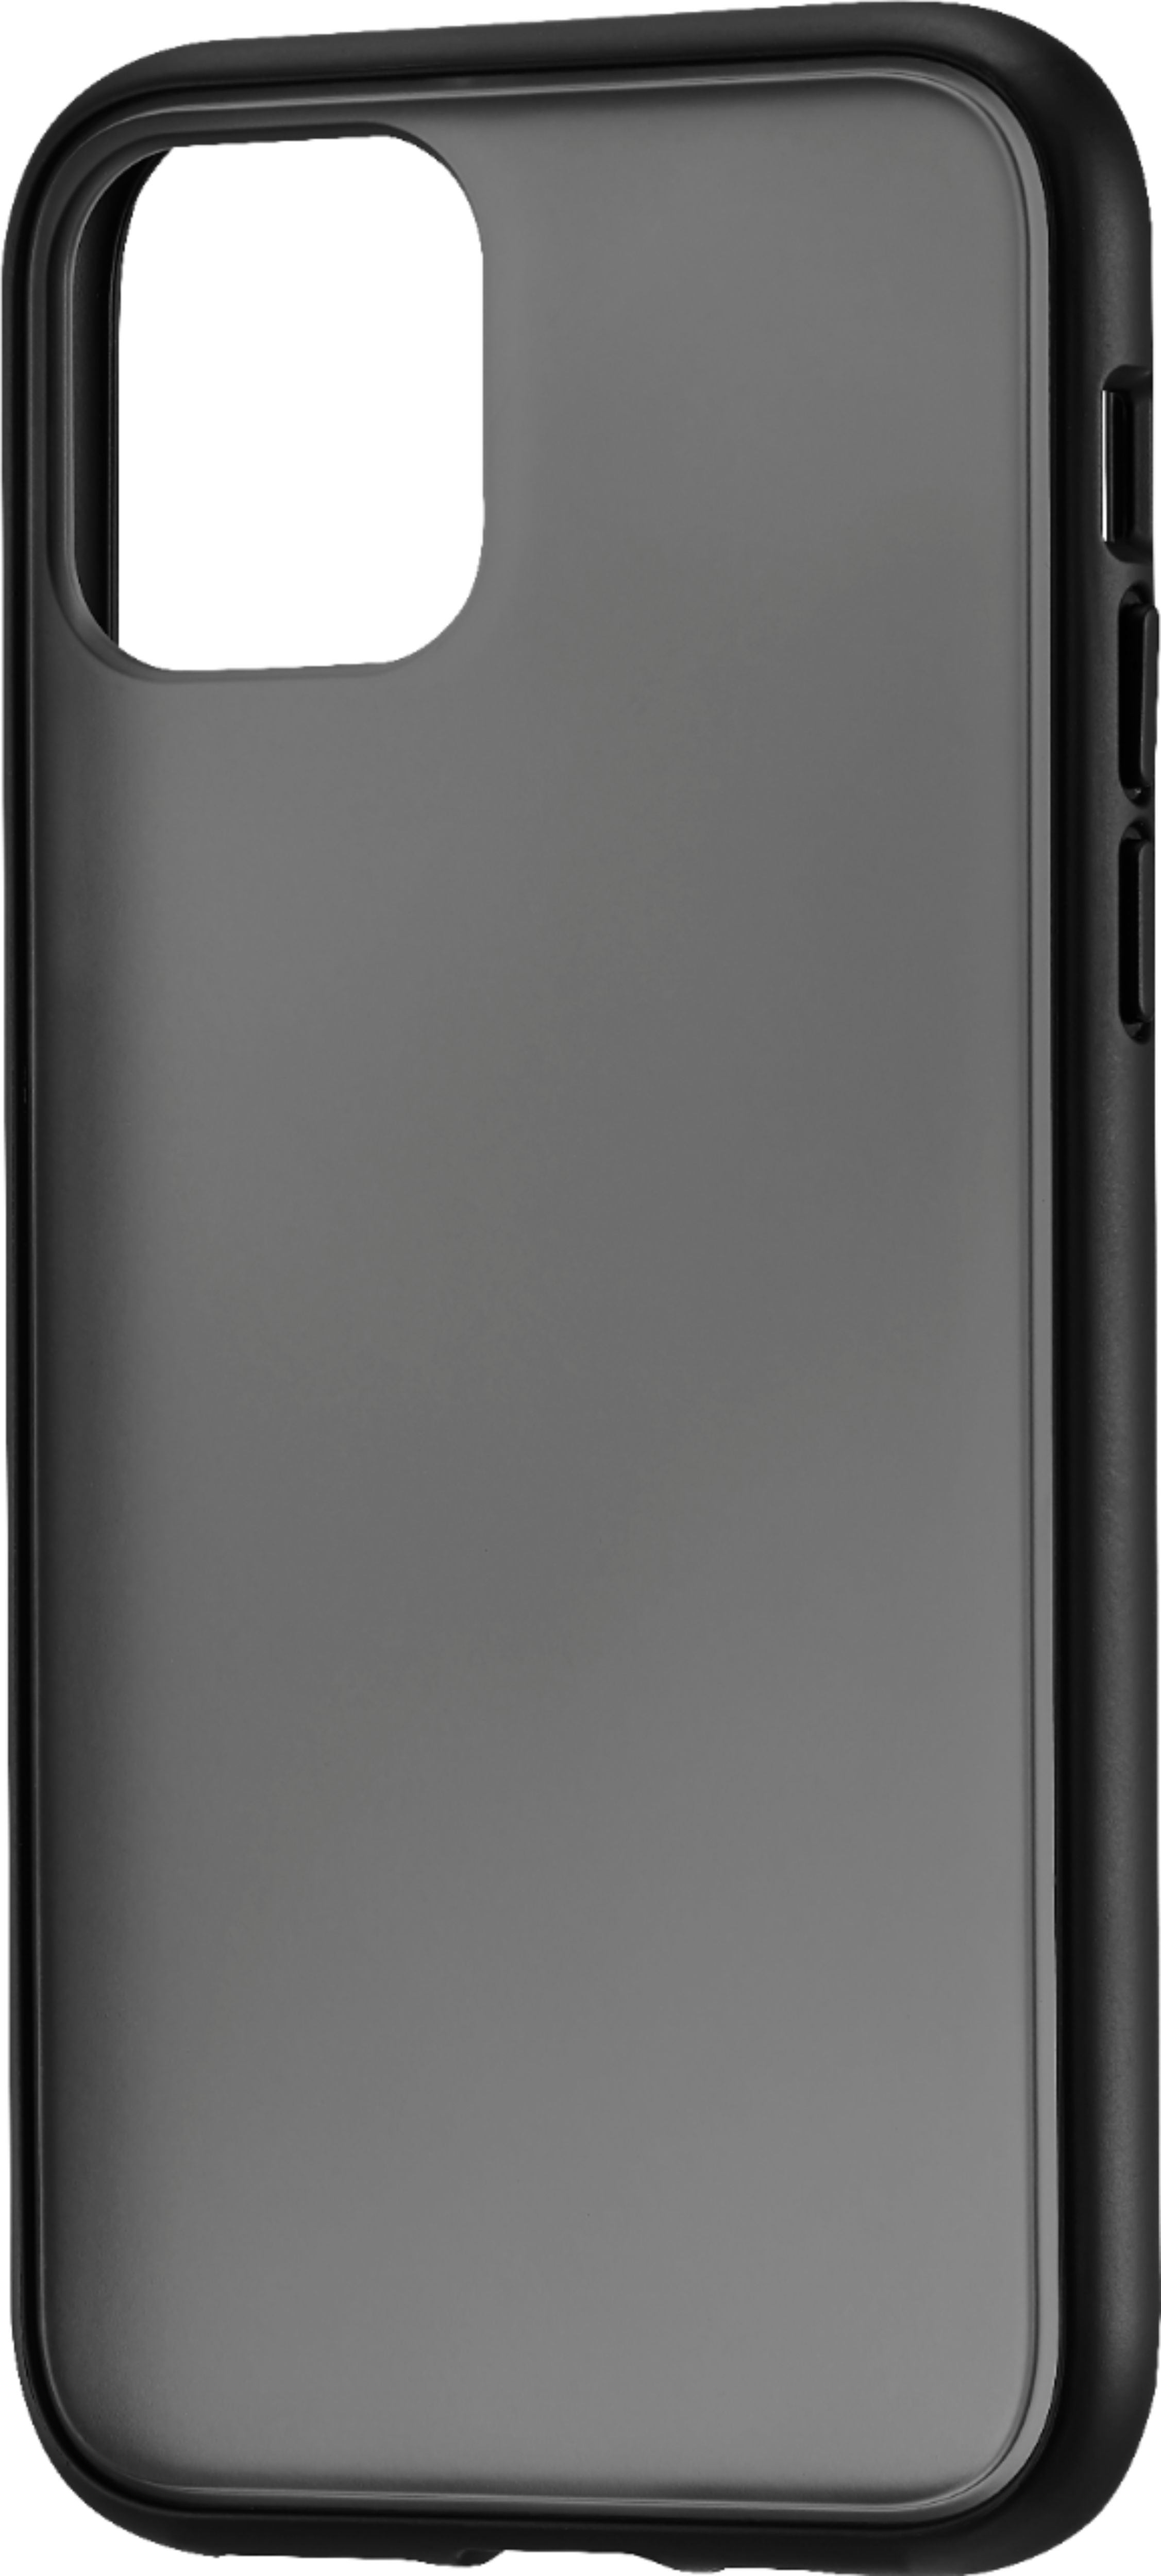 Insignia™ Hard Shell Case for Apple® iPhone® 11 Transparent Black  NS-MAXIMHBC - Best Buy